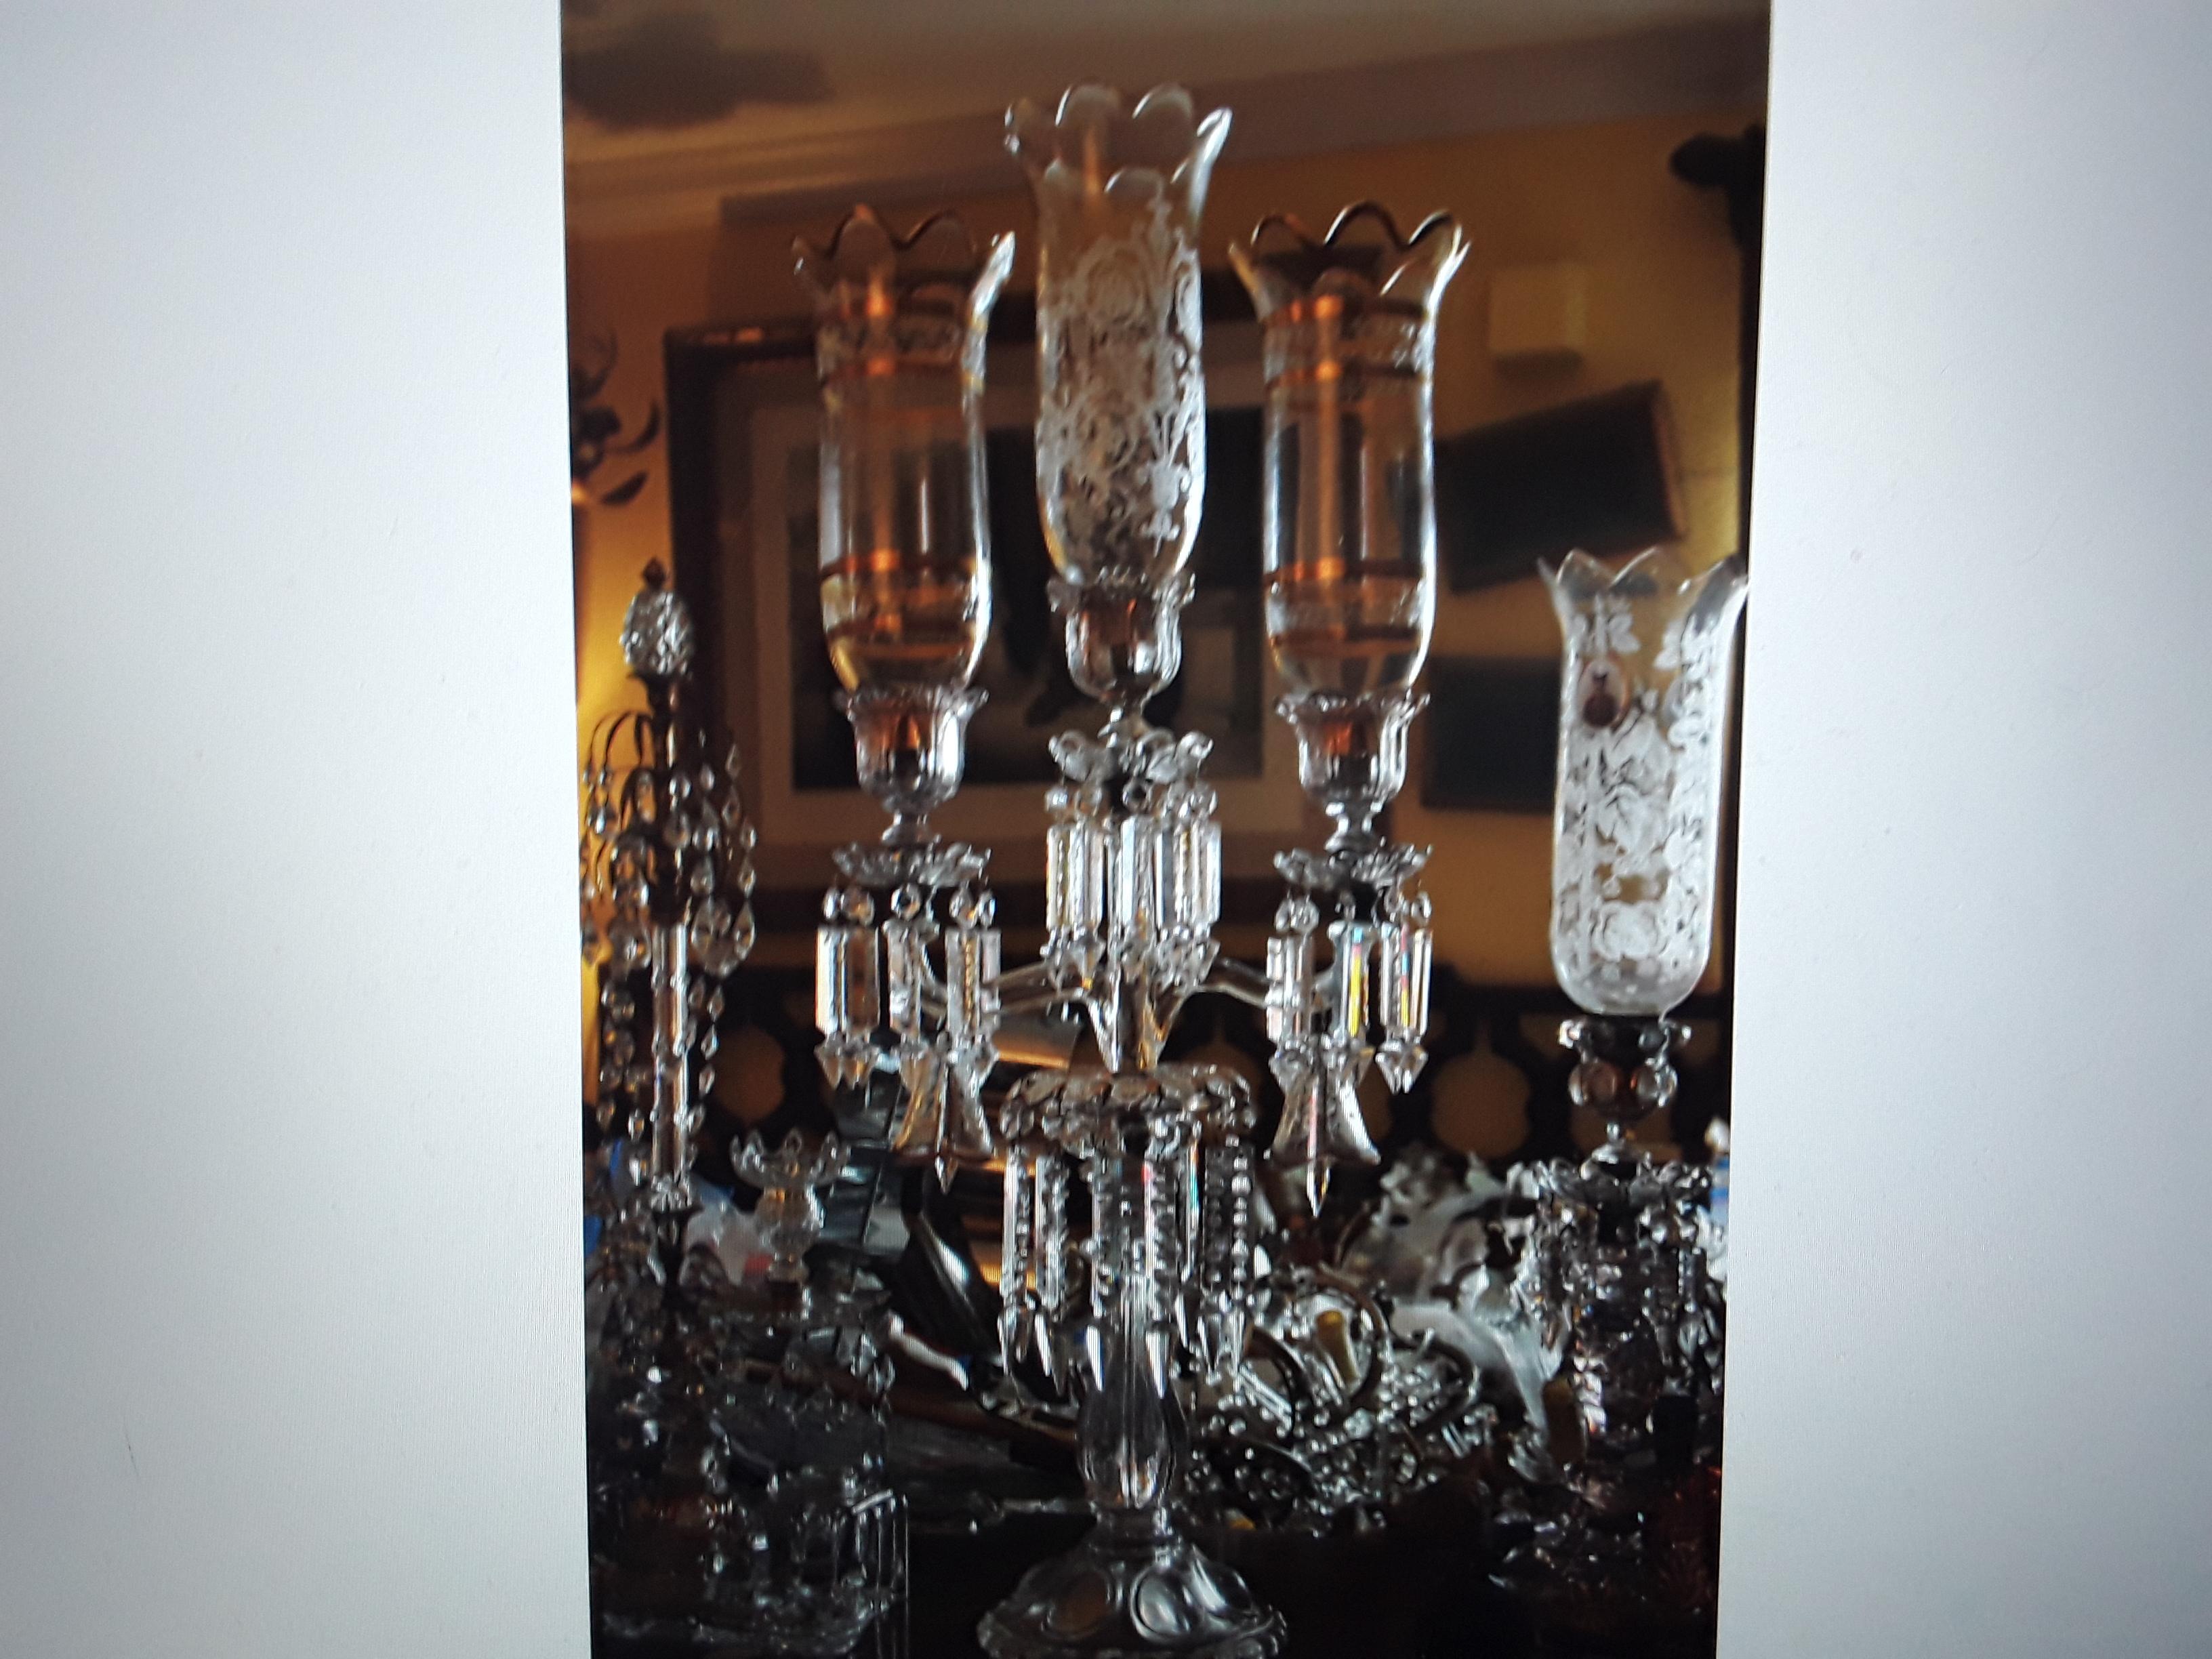 Grand Scale c1890's French Napoleon III Baccarat Crystal 3 Light Candelabra. Massive piece! Hand painted floral decor with 24K shades. Floral painted bells. Please look closely at pictures as they tell a story.